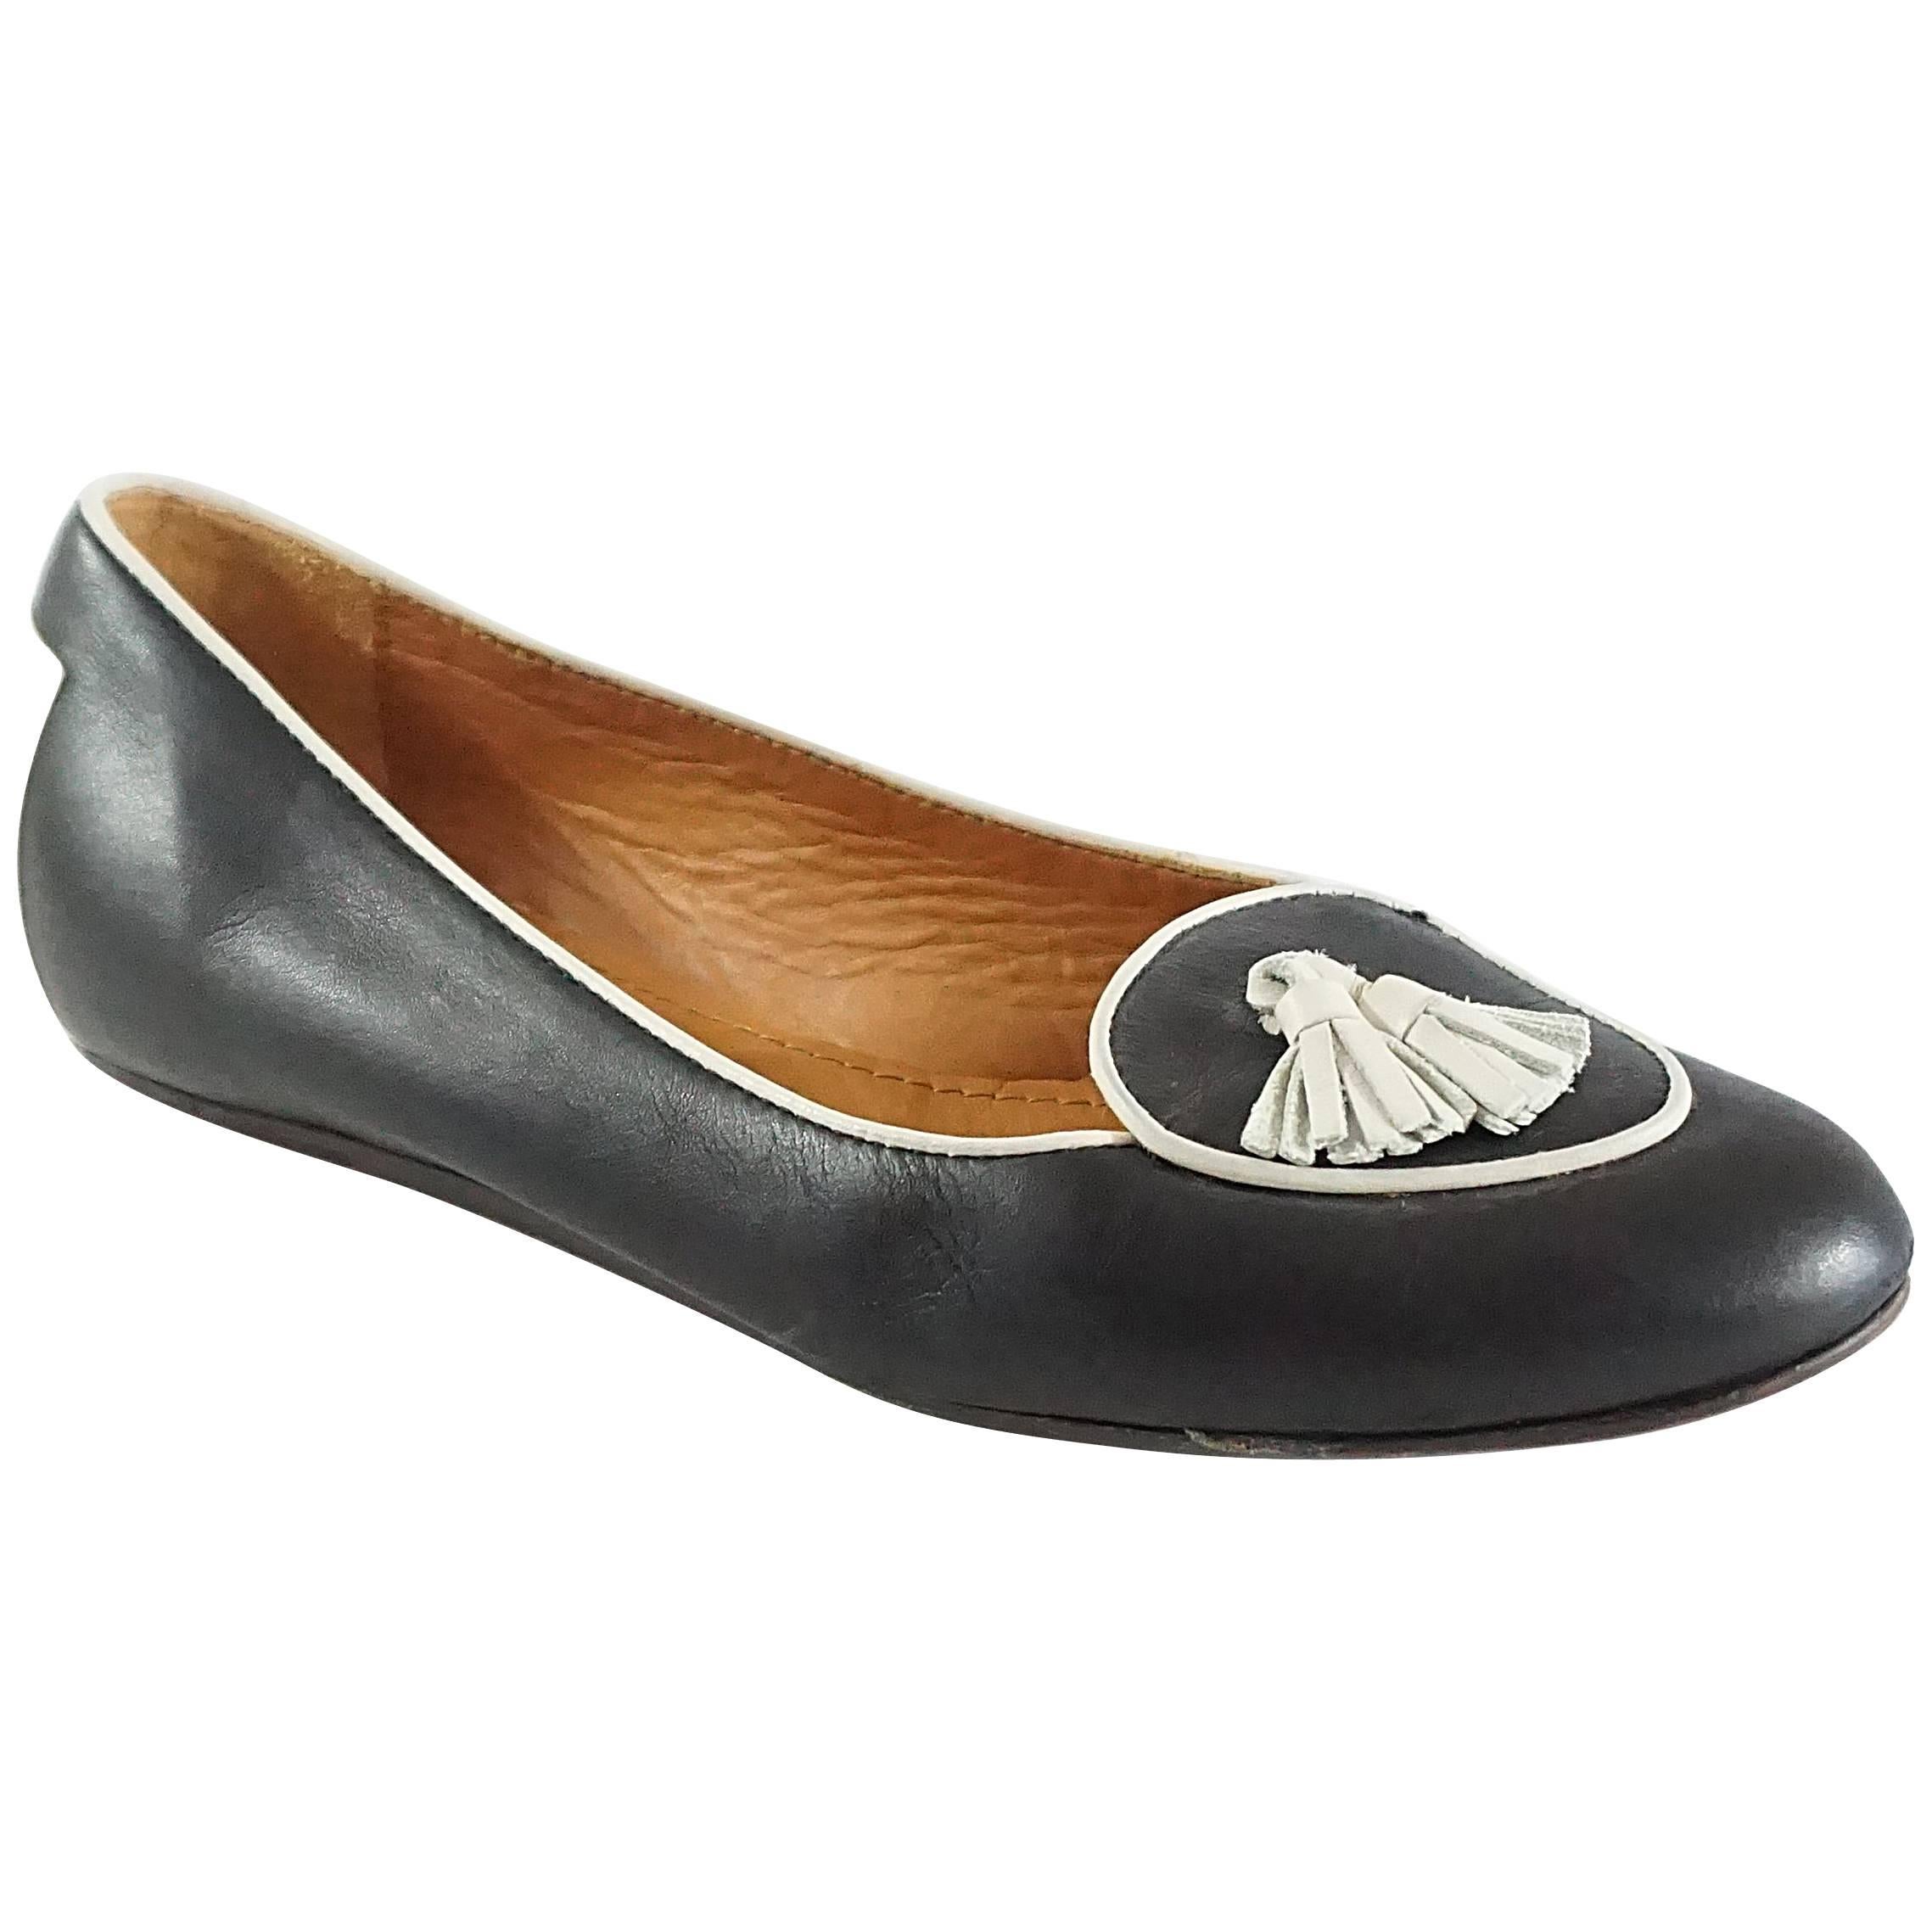 Lanvin Black and Ivory Tassel Loafers - 37.5